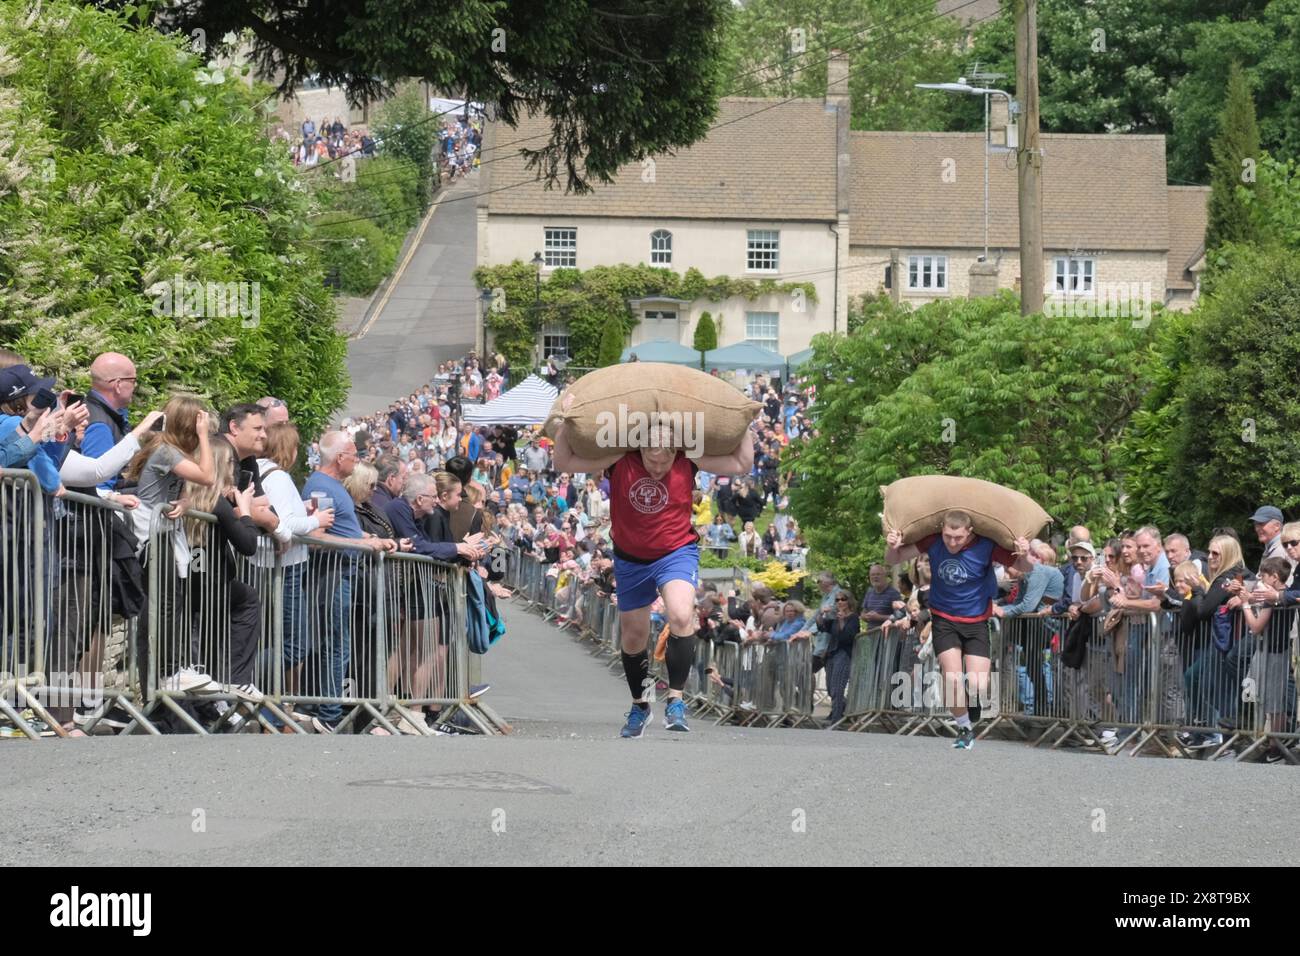 Tetbury, Gloucestershire, UK. 27th May, 2024. Woolsack races return to Tetbury after a 5-year hiatus. Competitors race up the steep 1 in 4 gradient of Gumstool Hill in this pretty Cotswold town carrying a woolsack. The men carry a 60lb sack and the ladies a 30lb sack. The annual races attract large crowds and raise money for local charities. Credit: JMF News/Alamy Live News Stock Photo